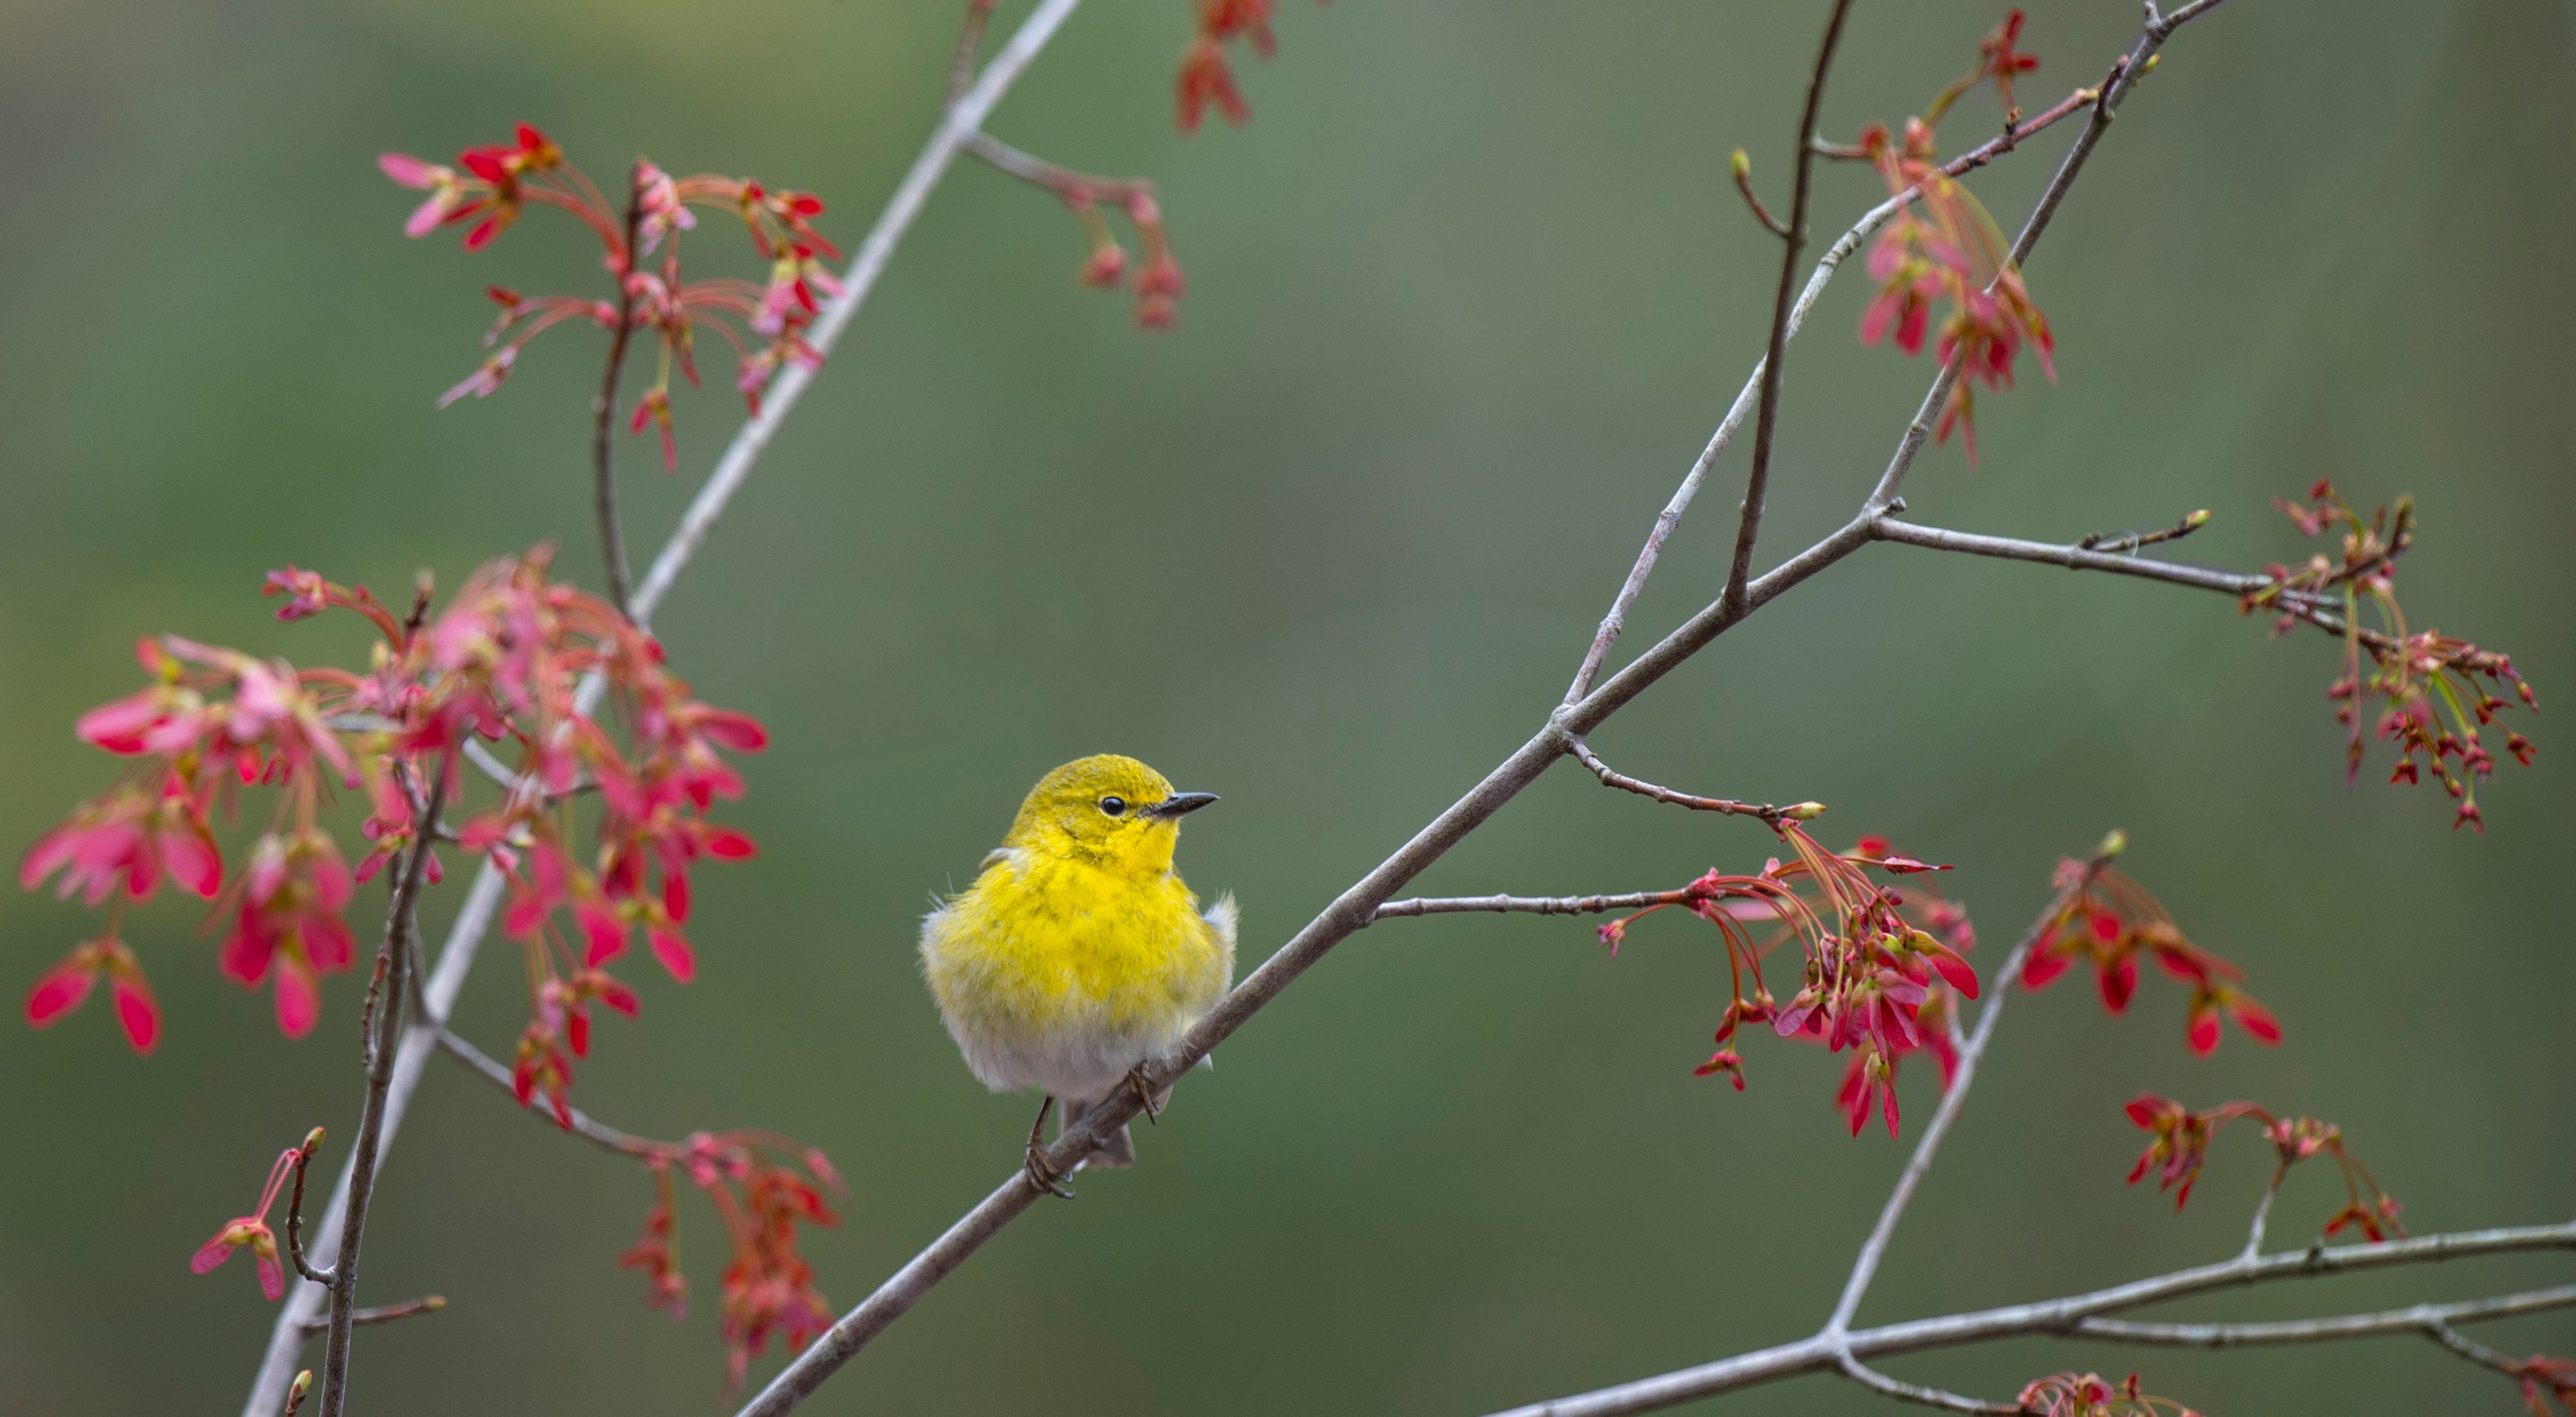 A yellow pine warbler in a budding red maple tree. 